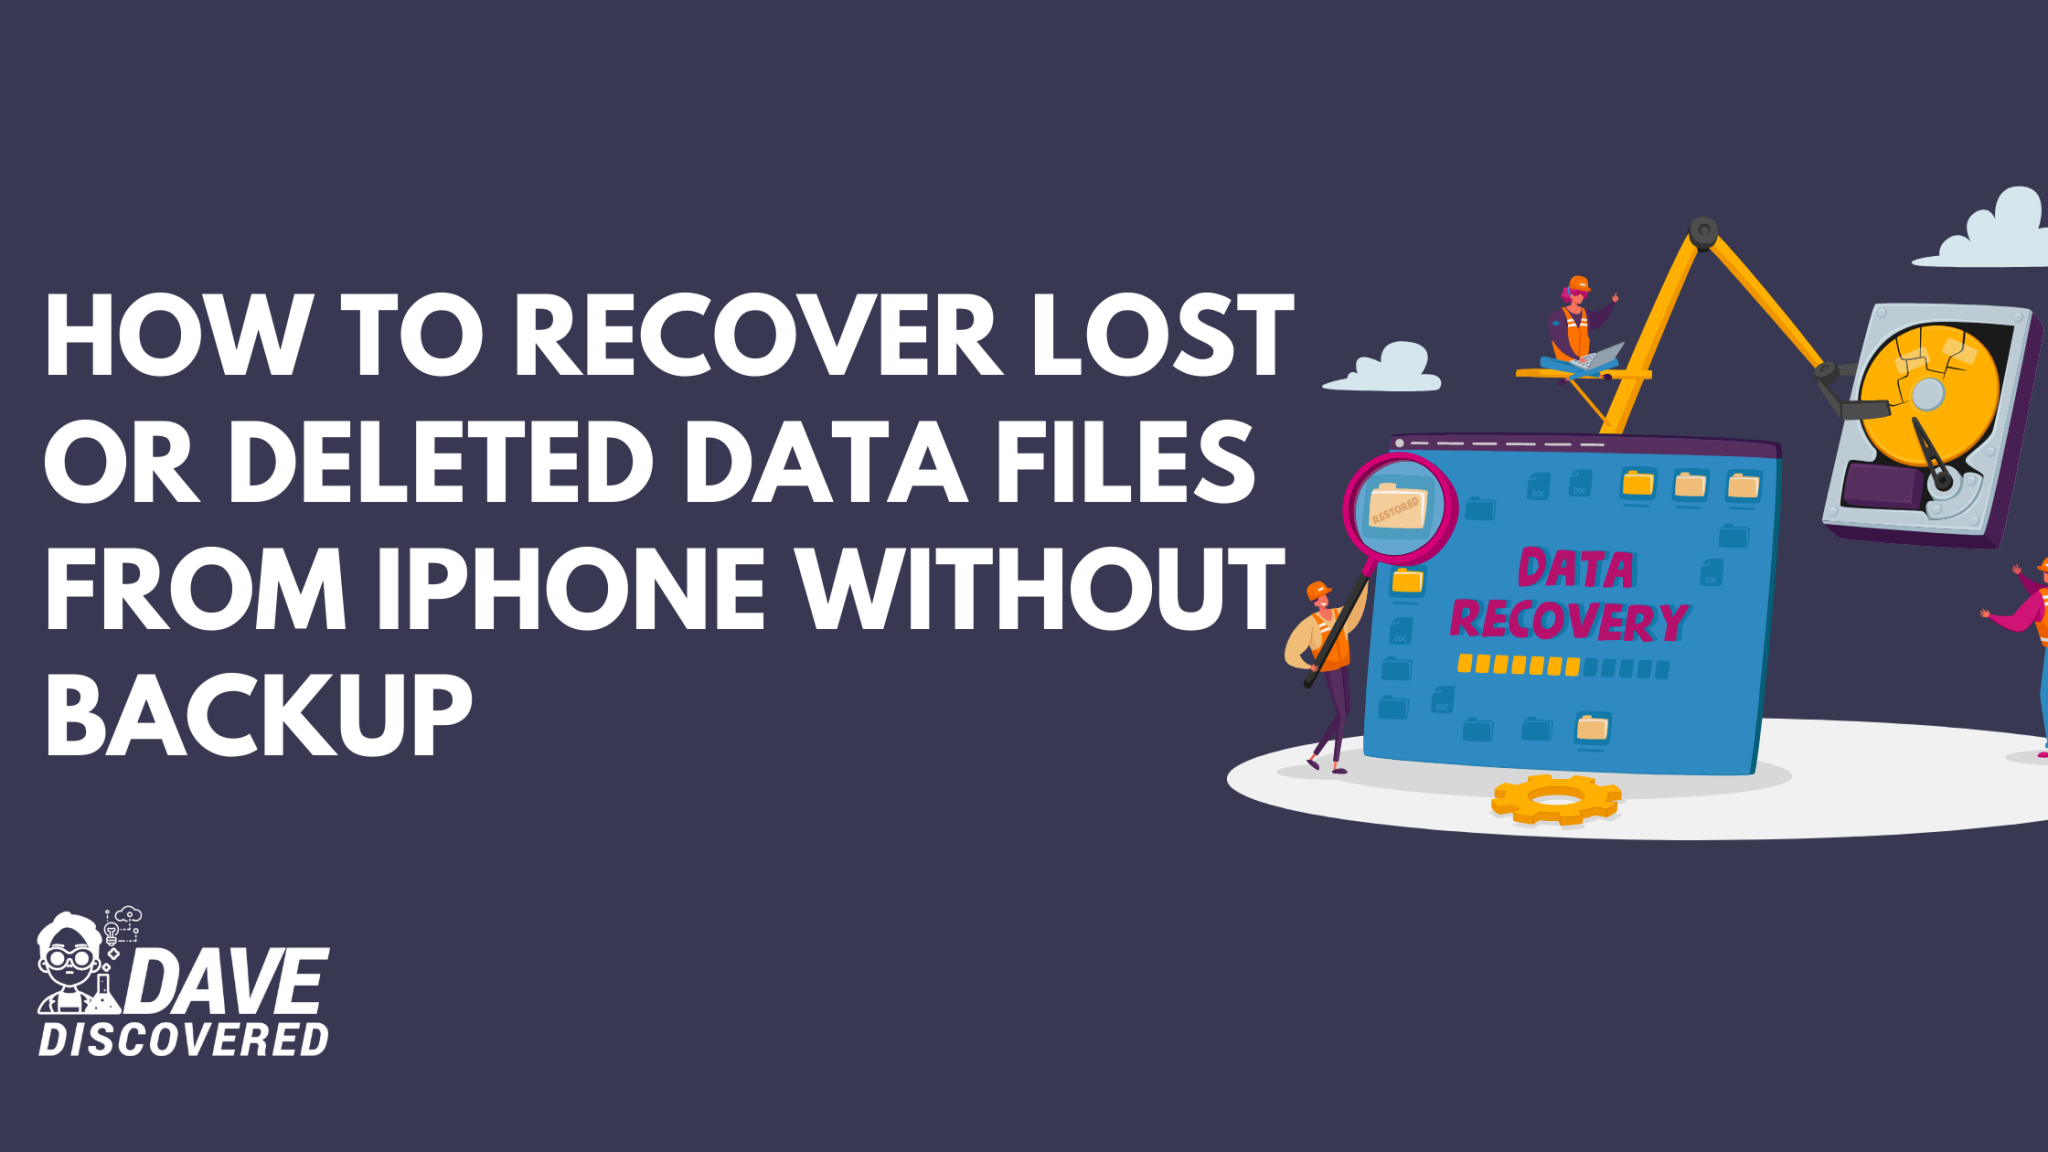 How to Recover Lost or Deleted Data Files From iPhone Without Backup